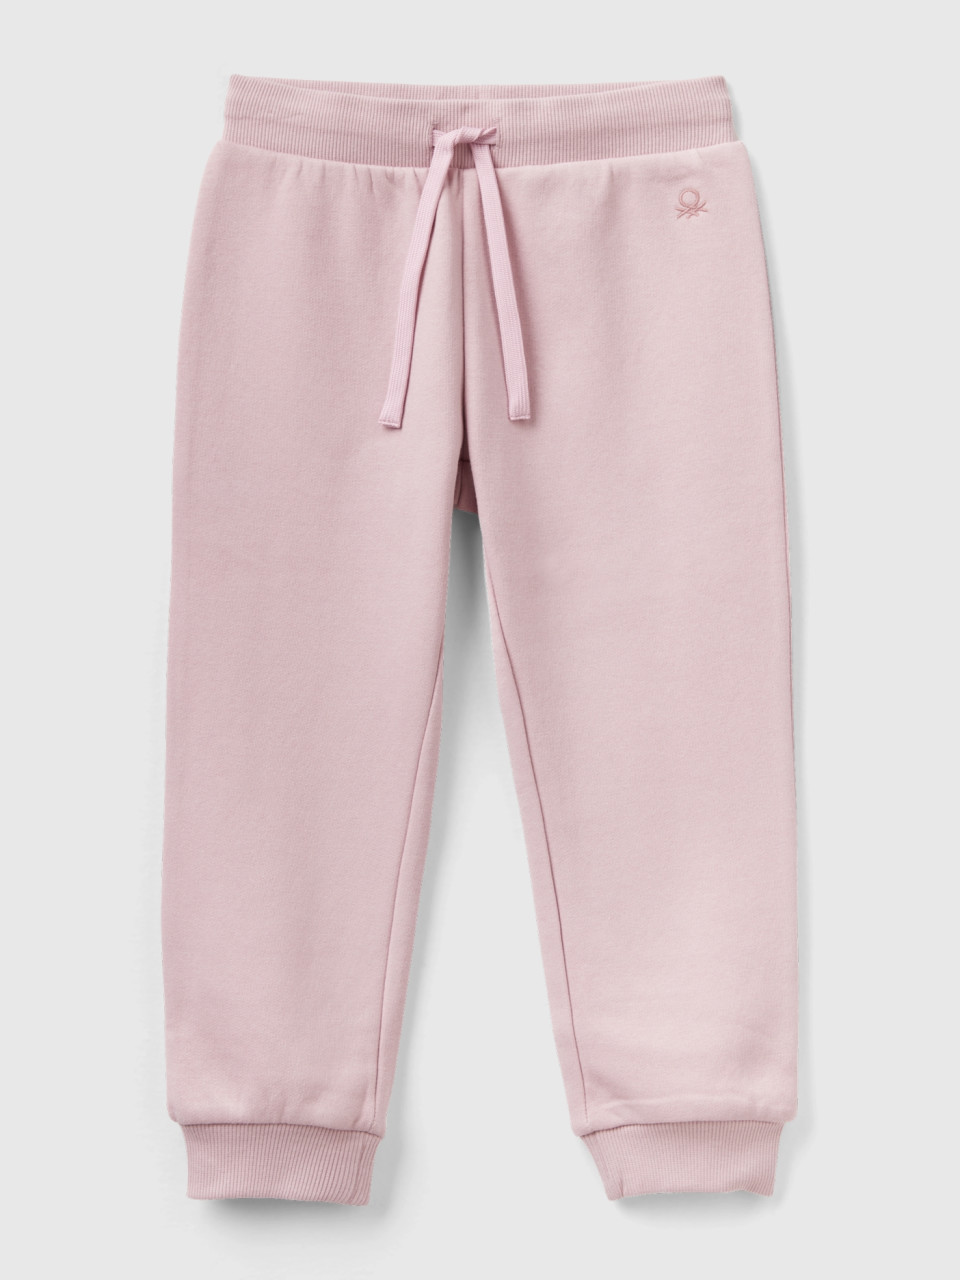 Benetton, Sweat Joggers With Drawstring, Pink, Kids